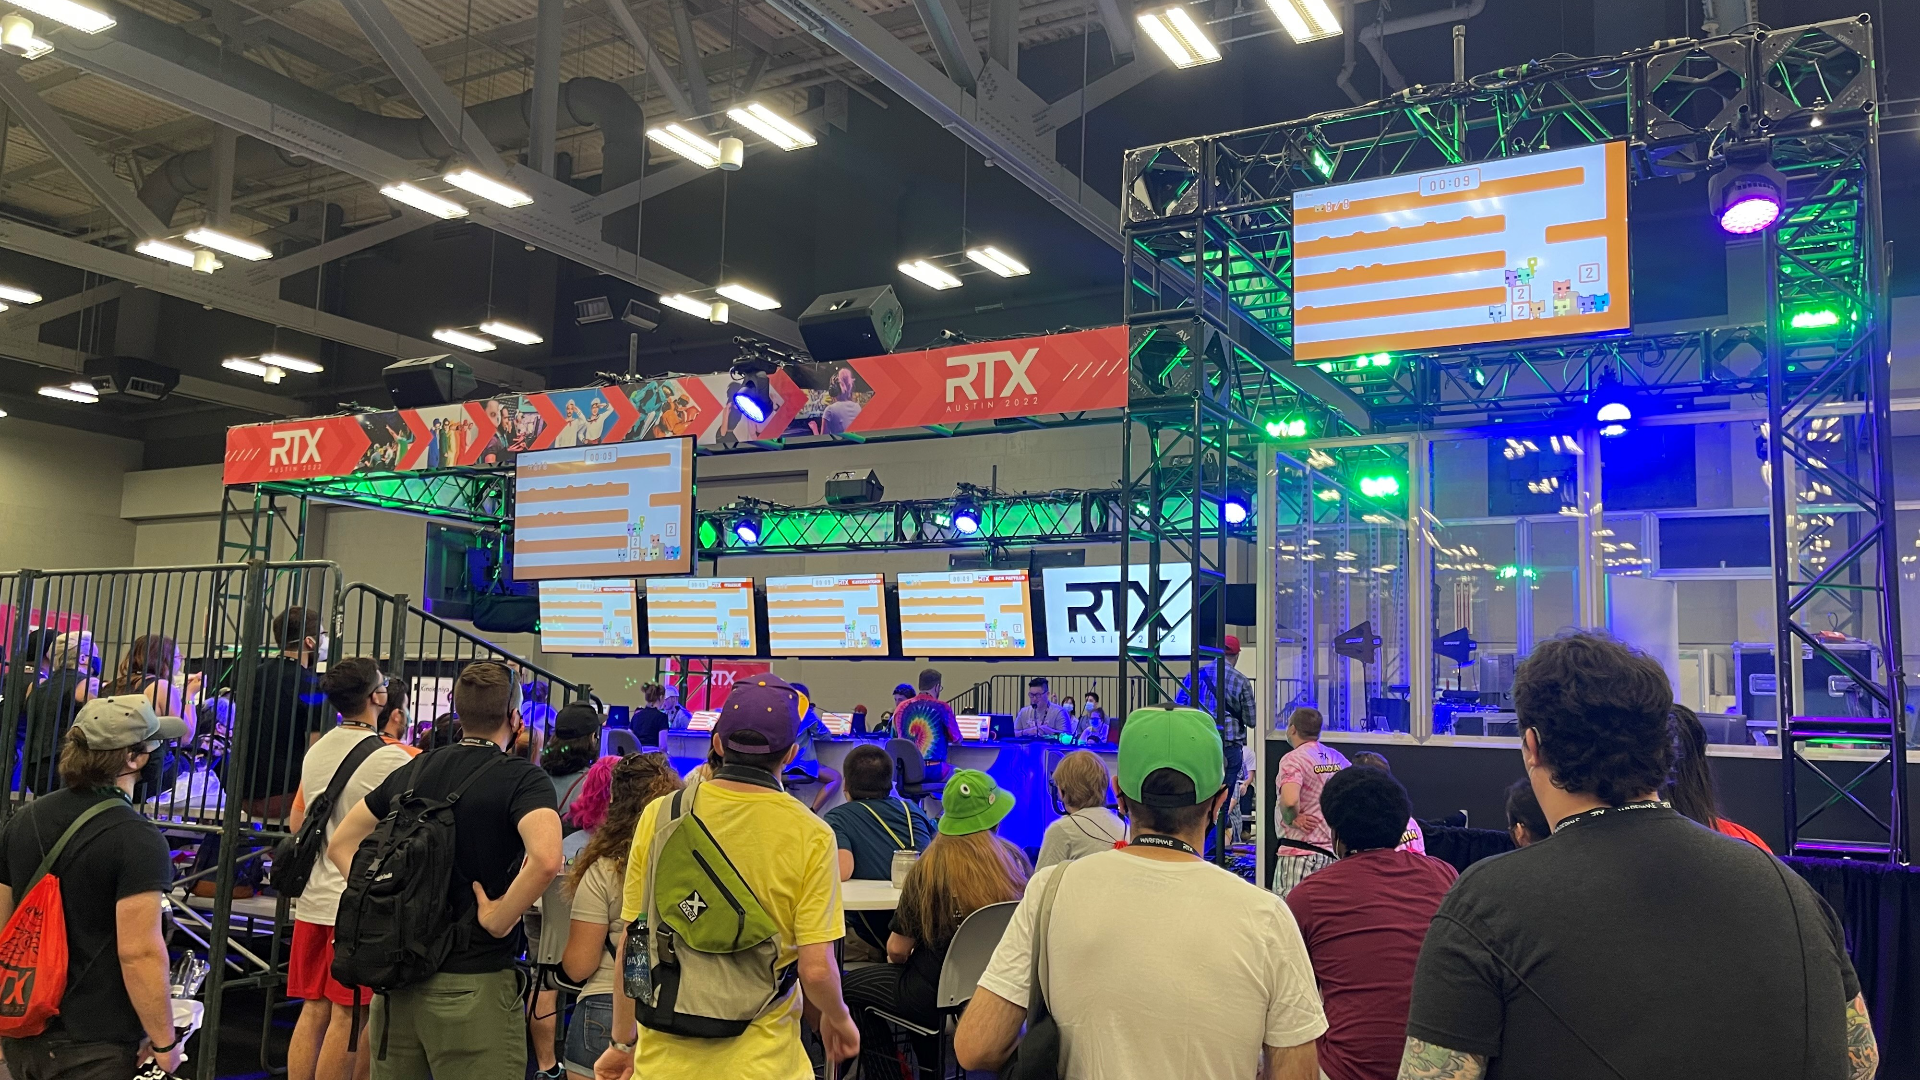 A shot of RTX Austin's Gaming Pavilion. Above the crowd of people are several television screens displaying visuals of the game "PICO PARK", and above that is a banner for RTX showing several images from various RT Productions.